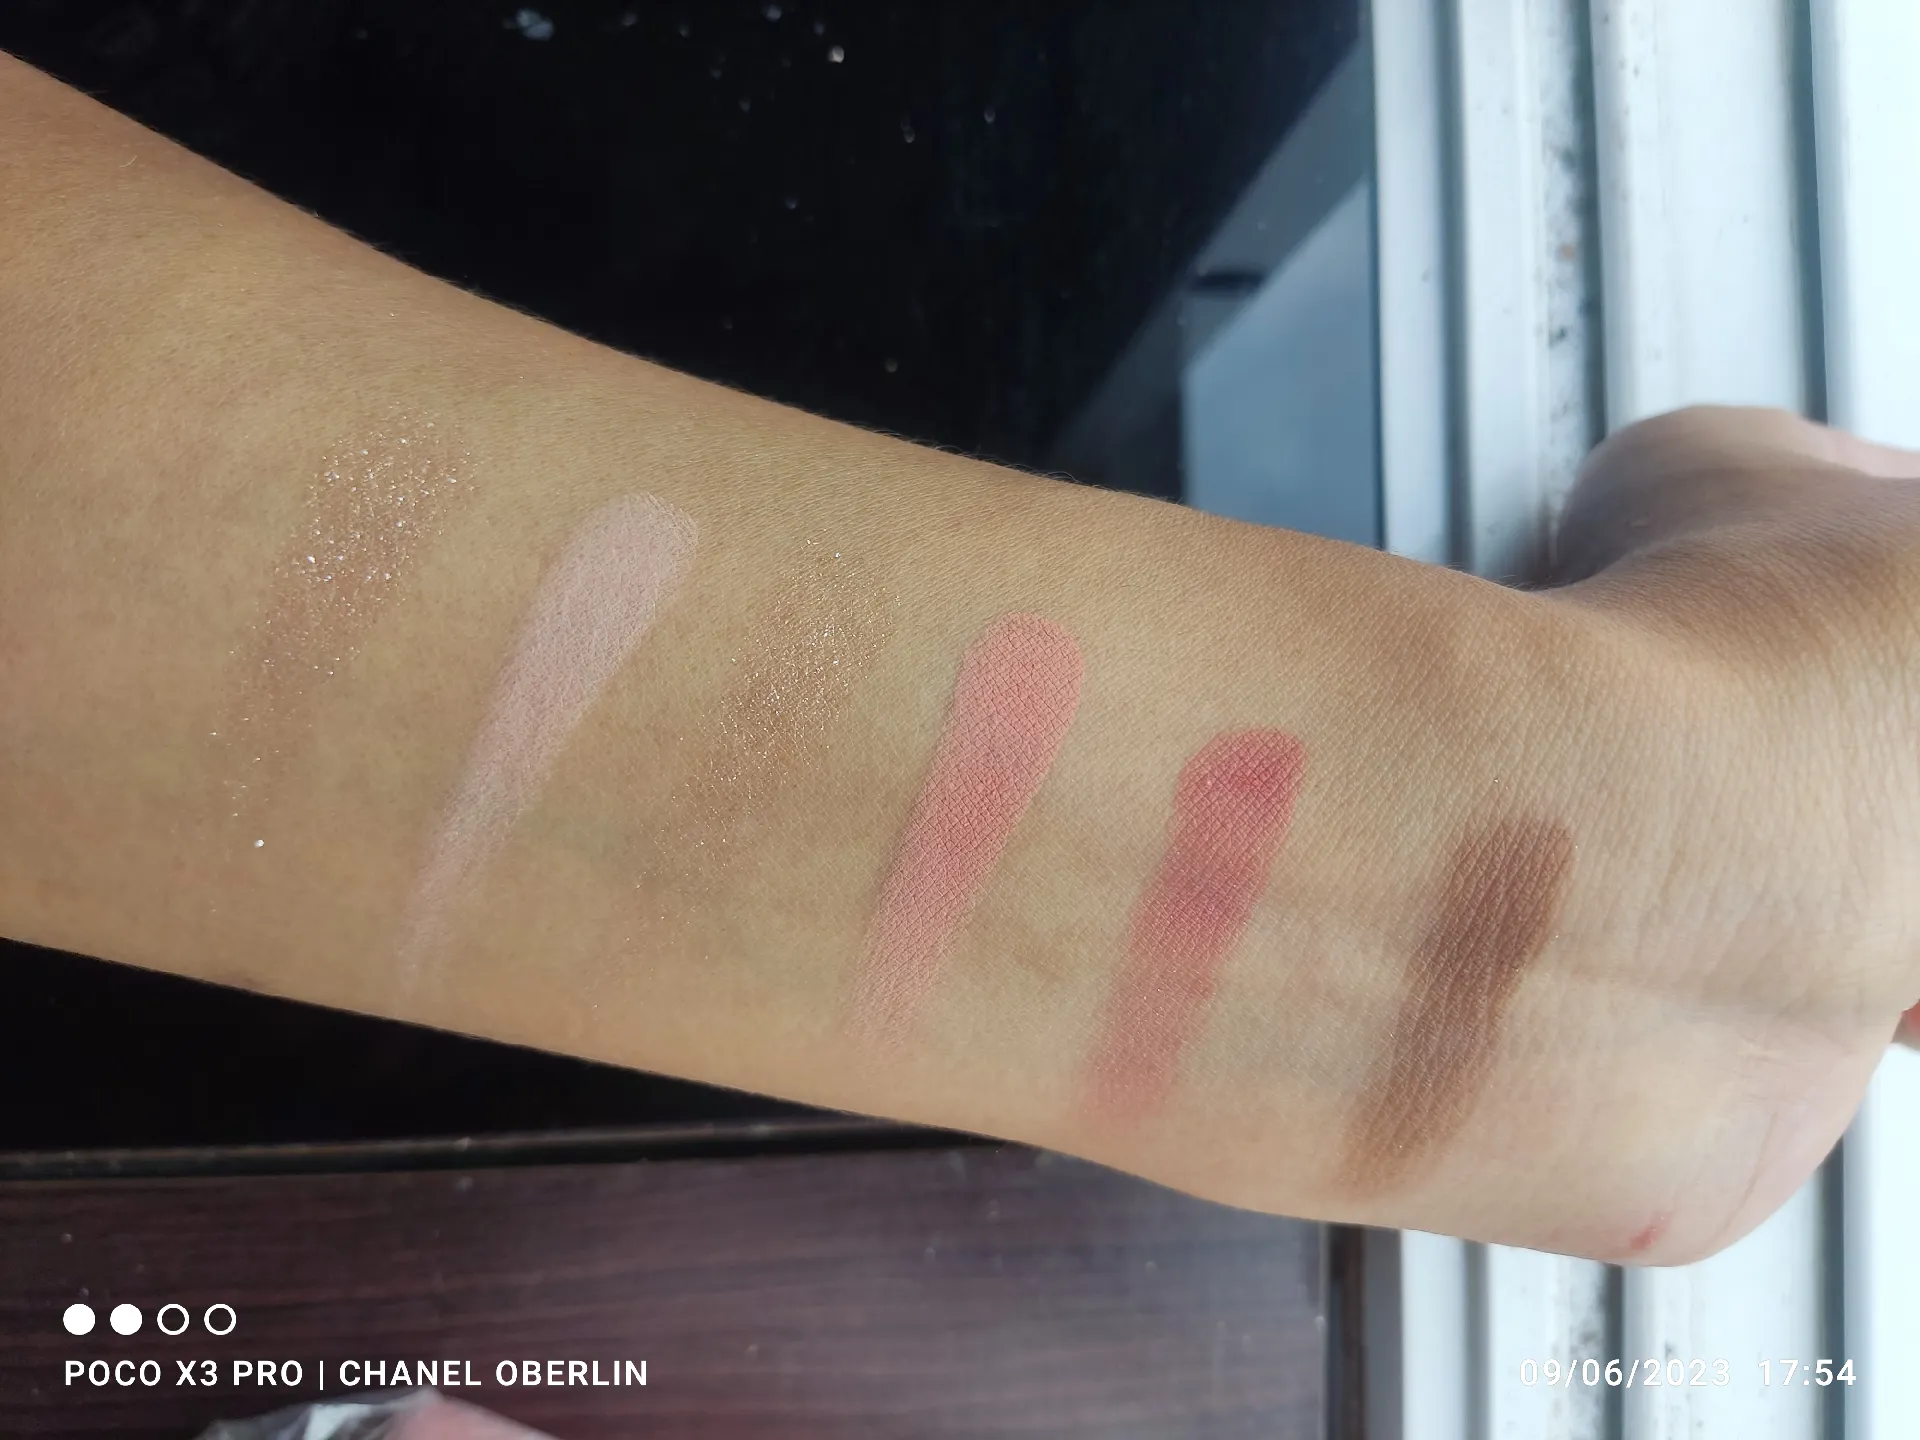 odbo sinature eyeshadow palette #03, Gallery posted by Chanel Oberlin